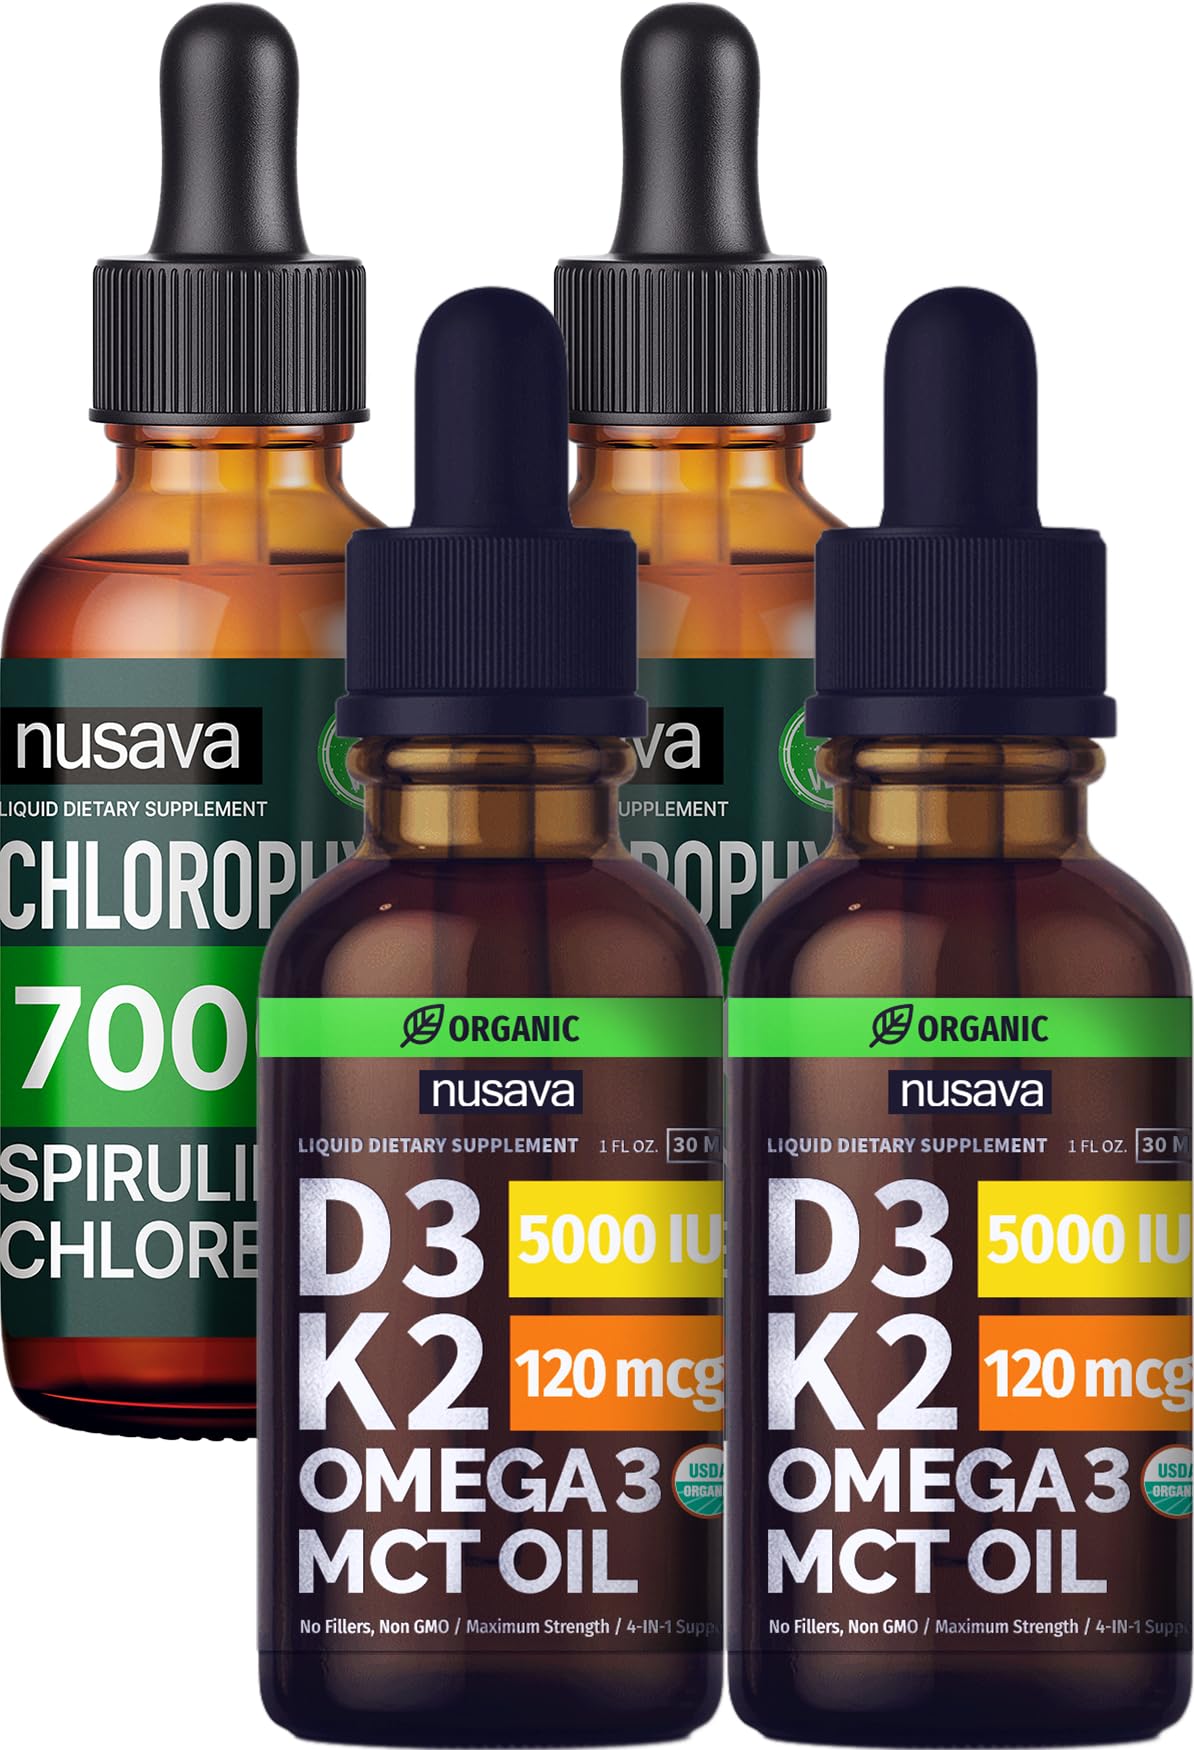 NUSAVA Unflavored D3 K2 Drops and Chlorophyll Liquid Drops Bundle - Potent Liquid Vitamins for Heart, Joint, Energy, & Immune Support - Non-GMO, Gluten-Free, 2pk Each